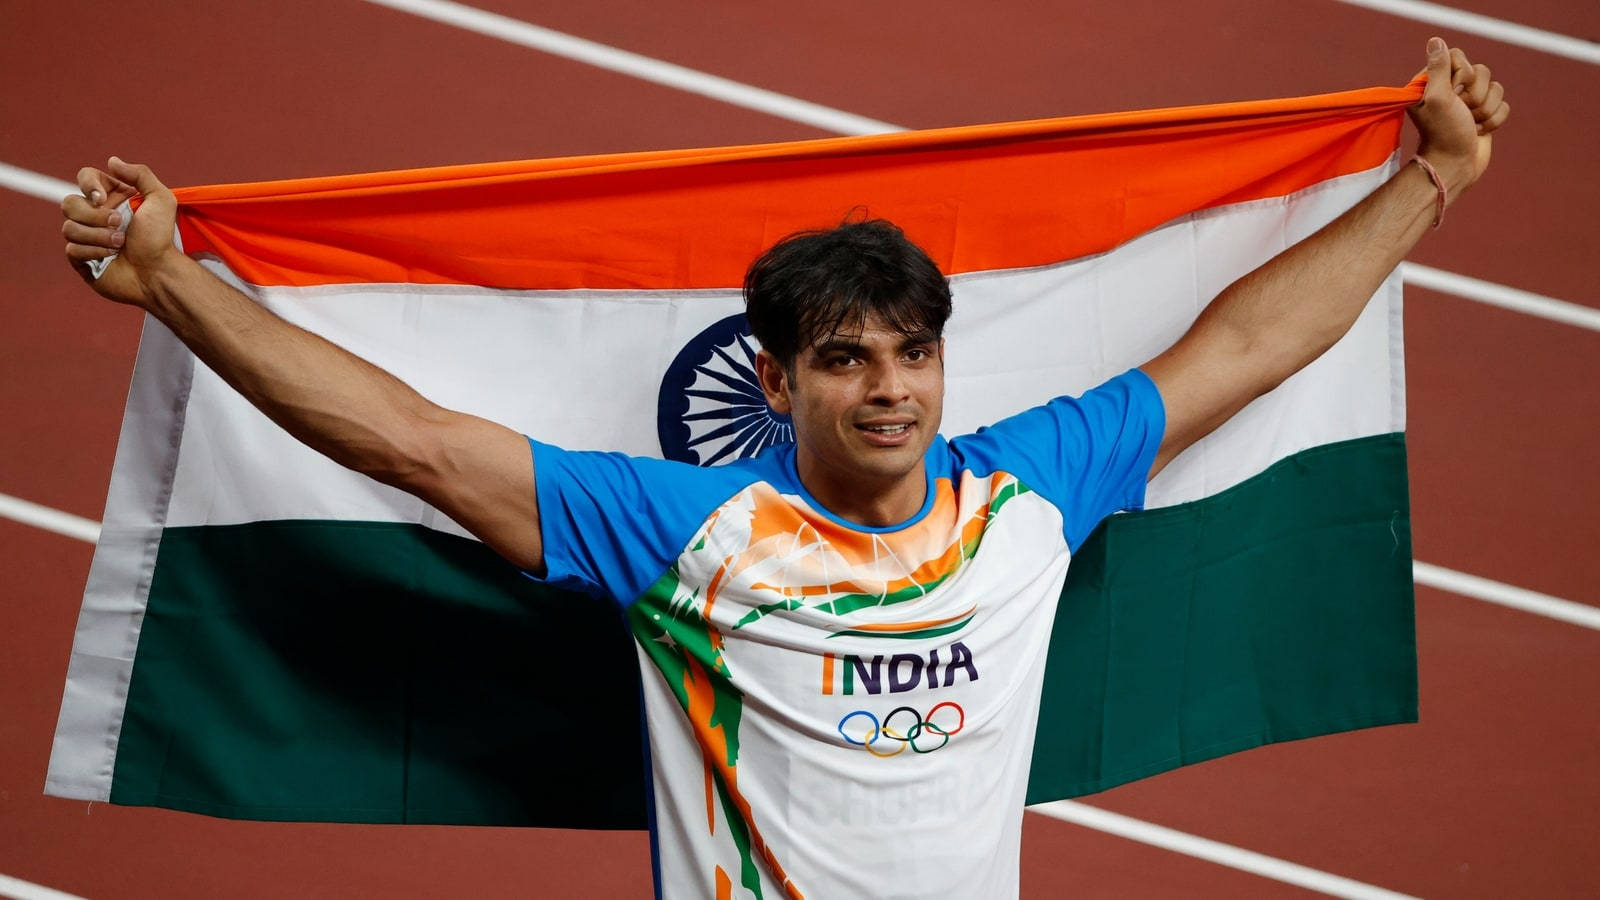 Neeraj Chopra With Indian Flag After His Victorious Olympic Win Wallpaper